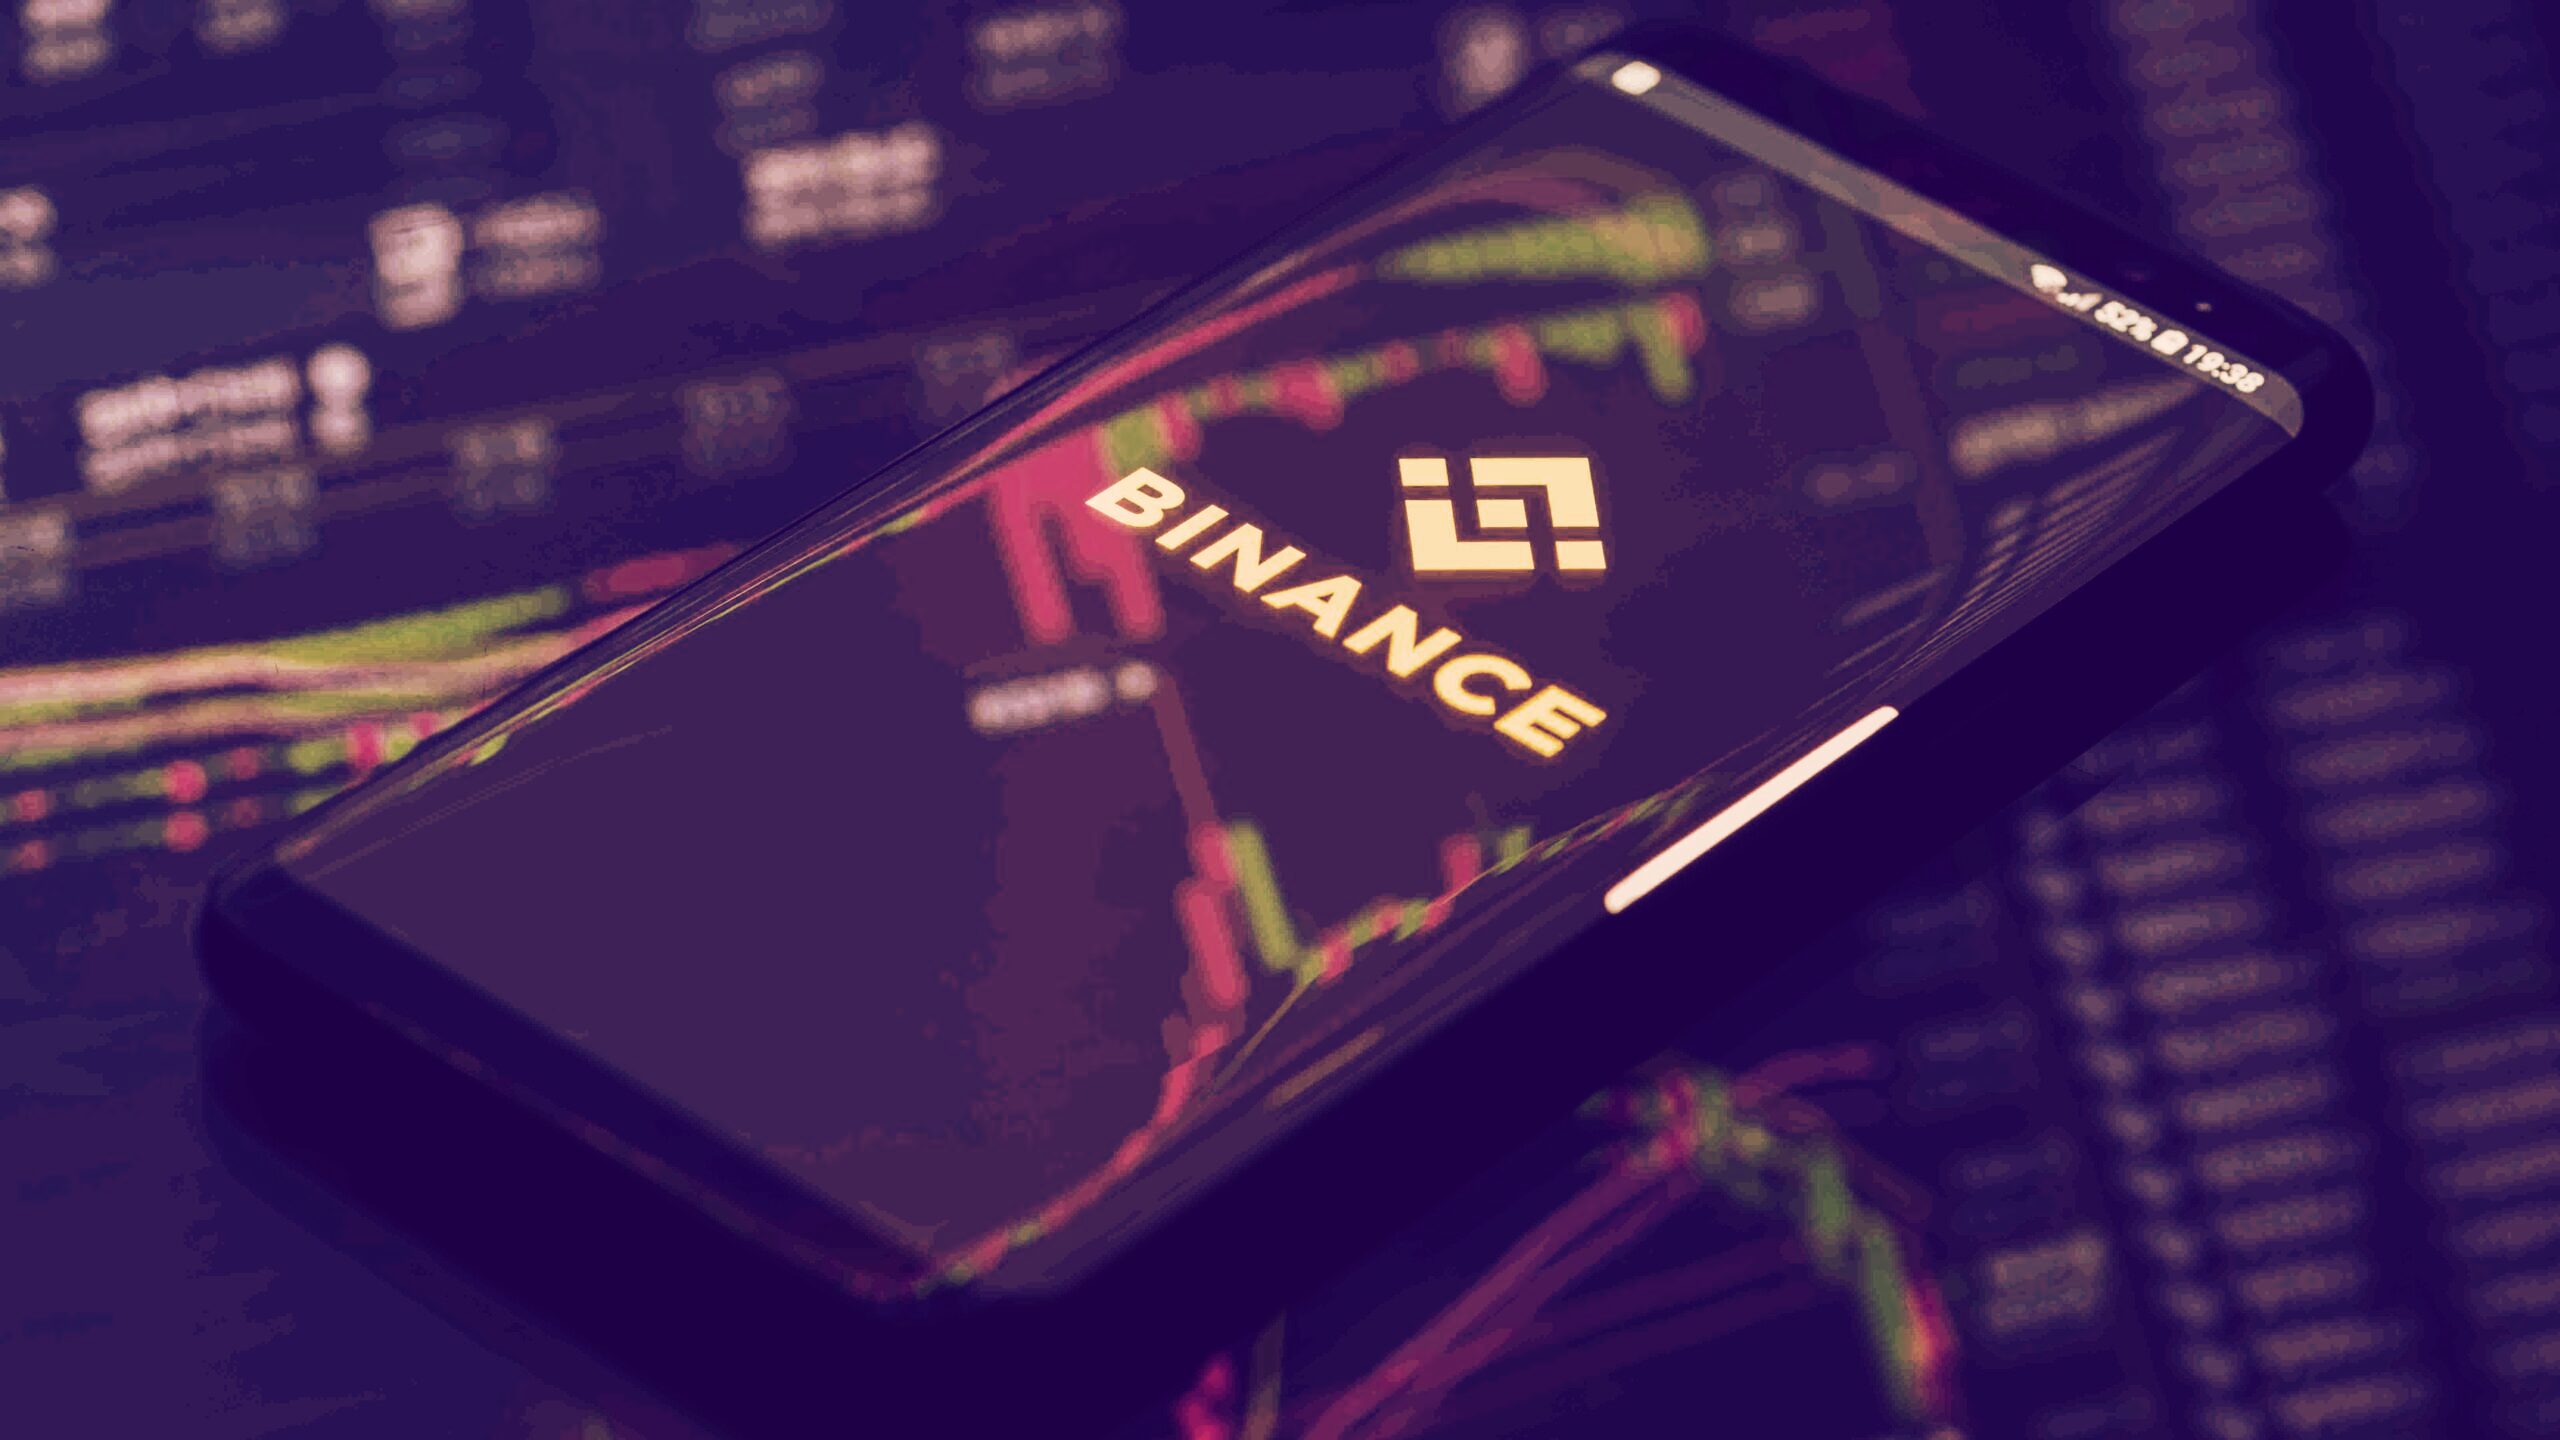 Binance has seen record futures volumes this month. Image: Shutterstock